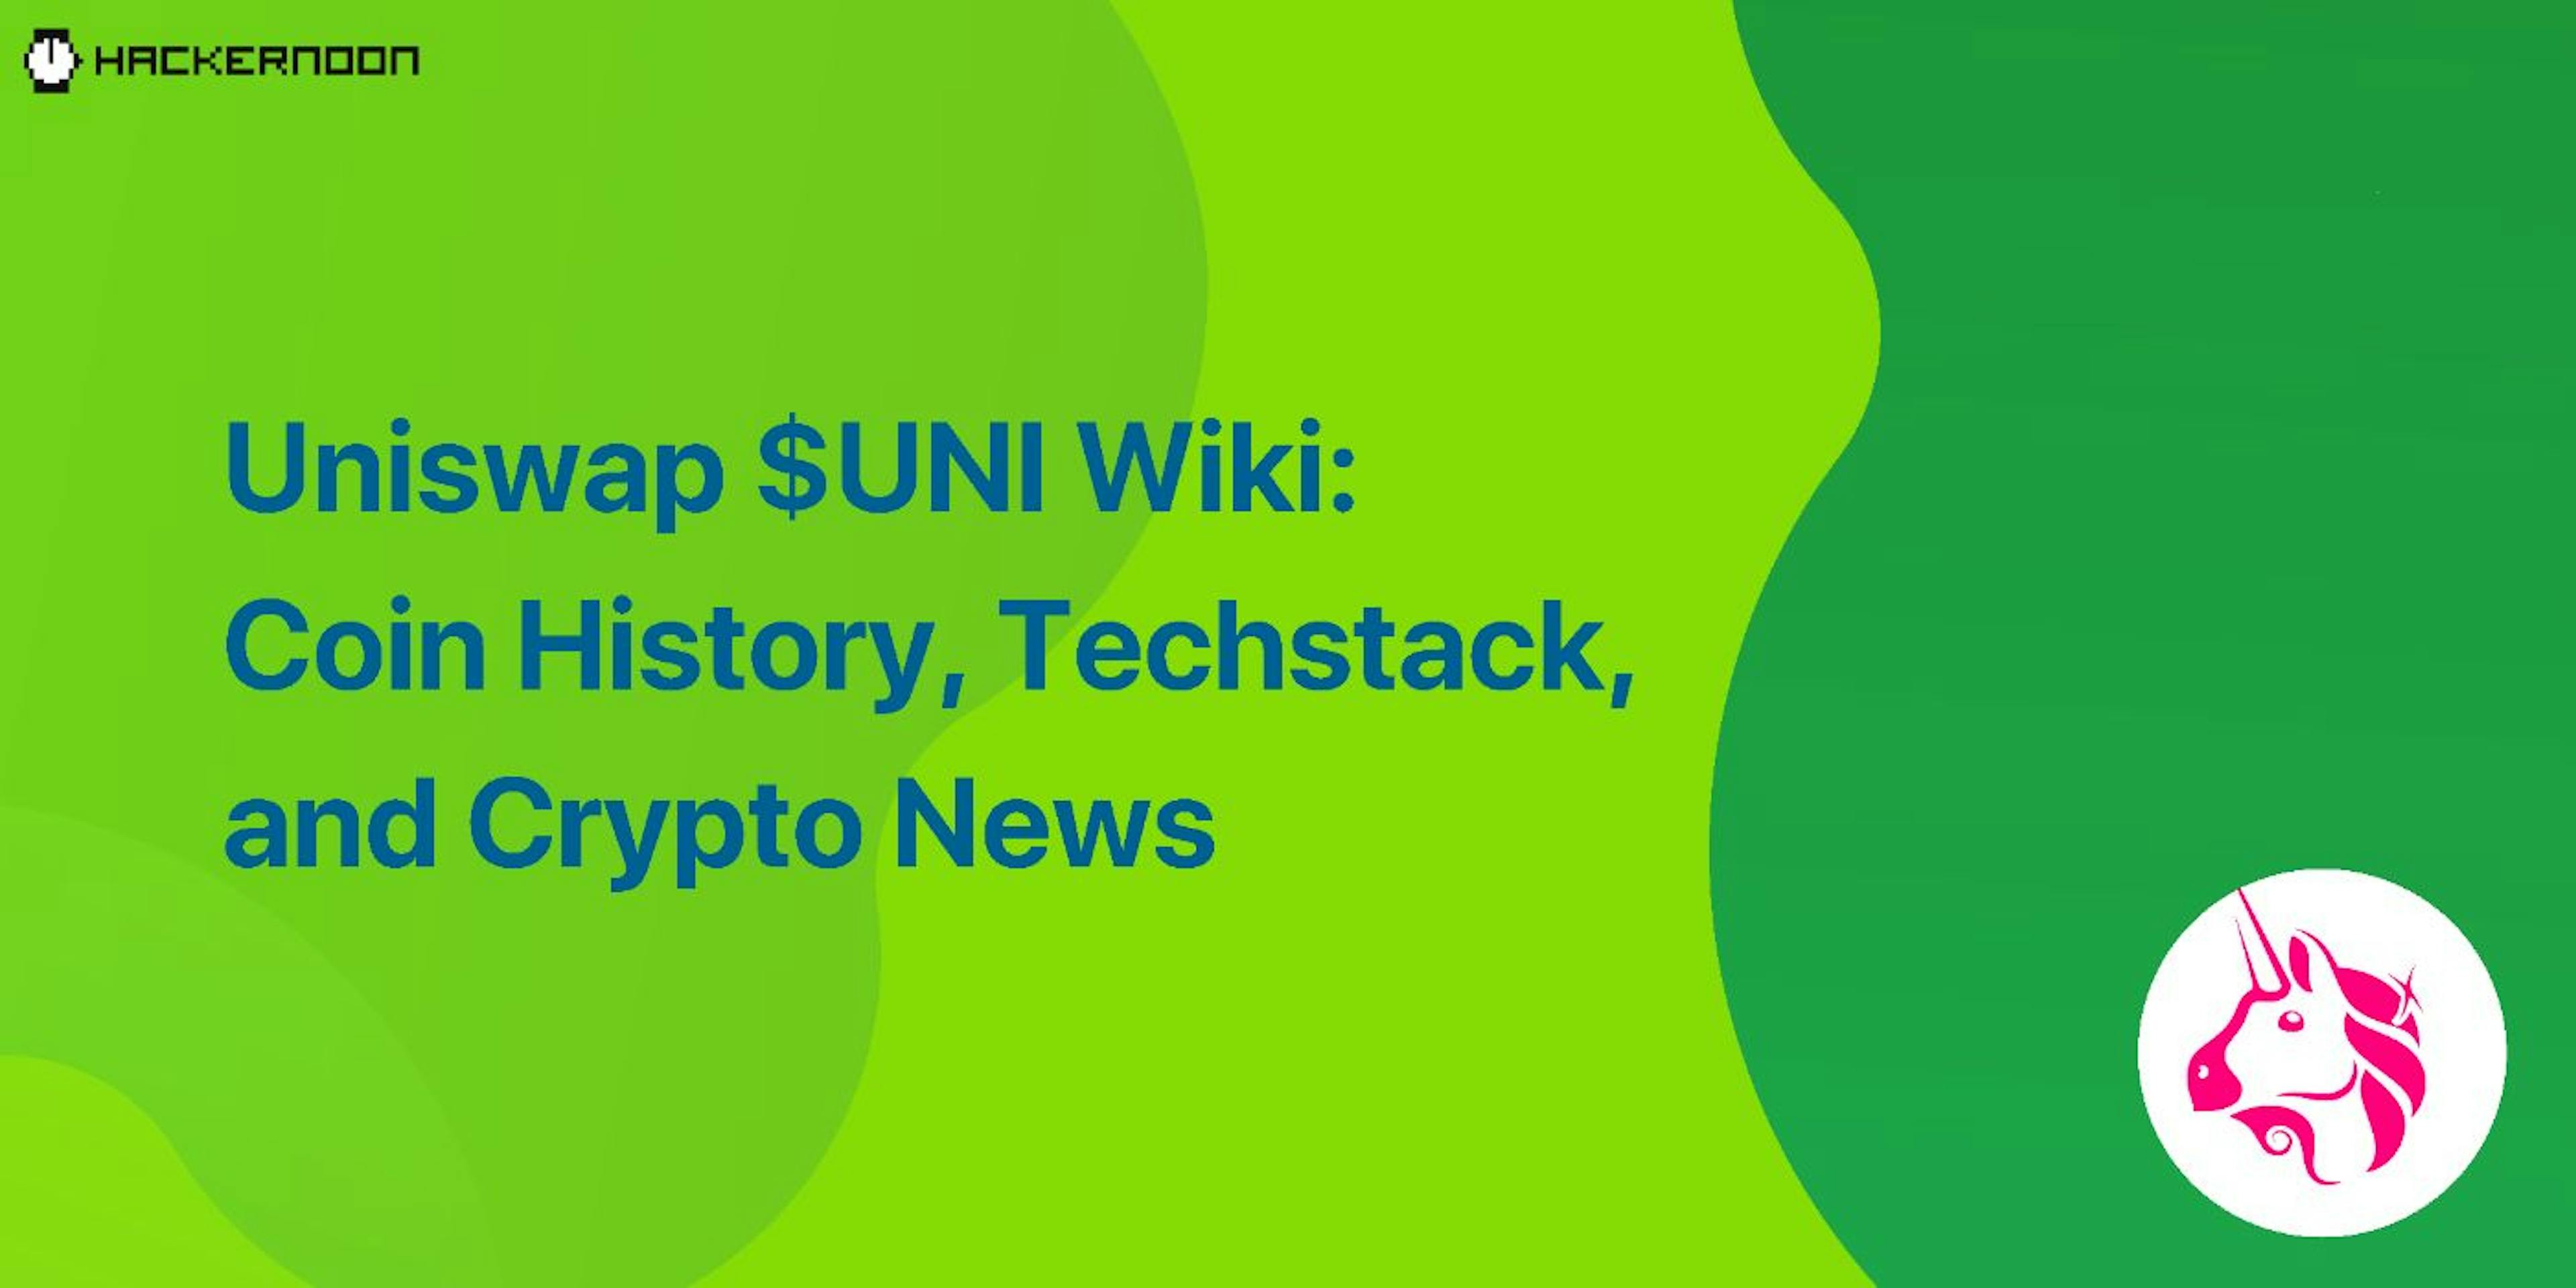 featured image - Uniswap $UNI Wiki: Coin History, Techstack, and Crypto News